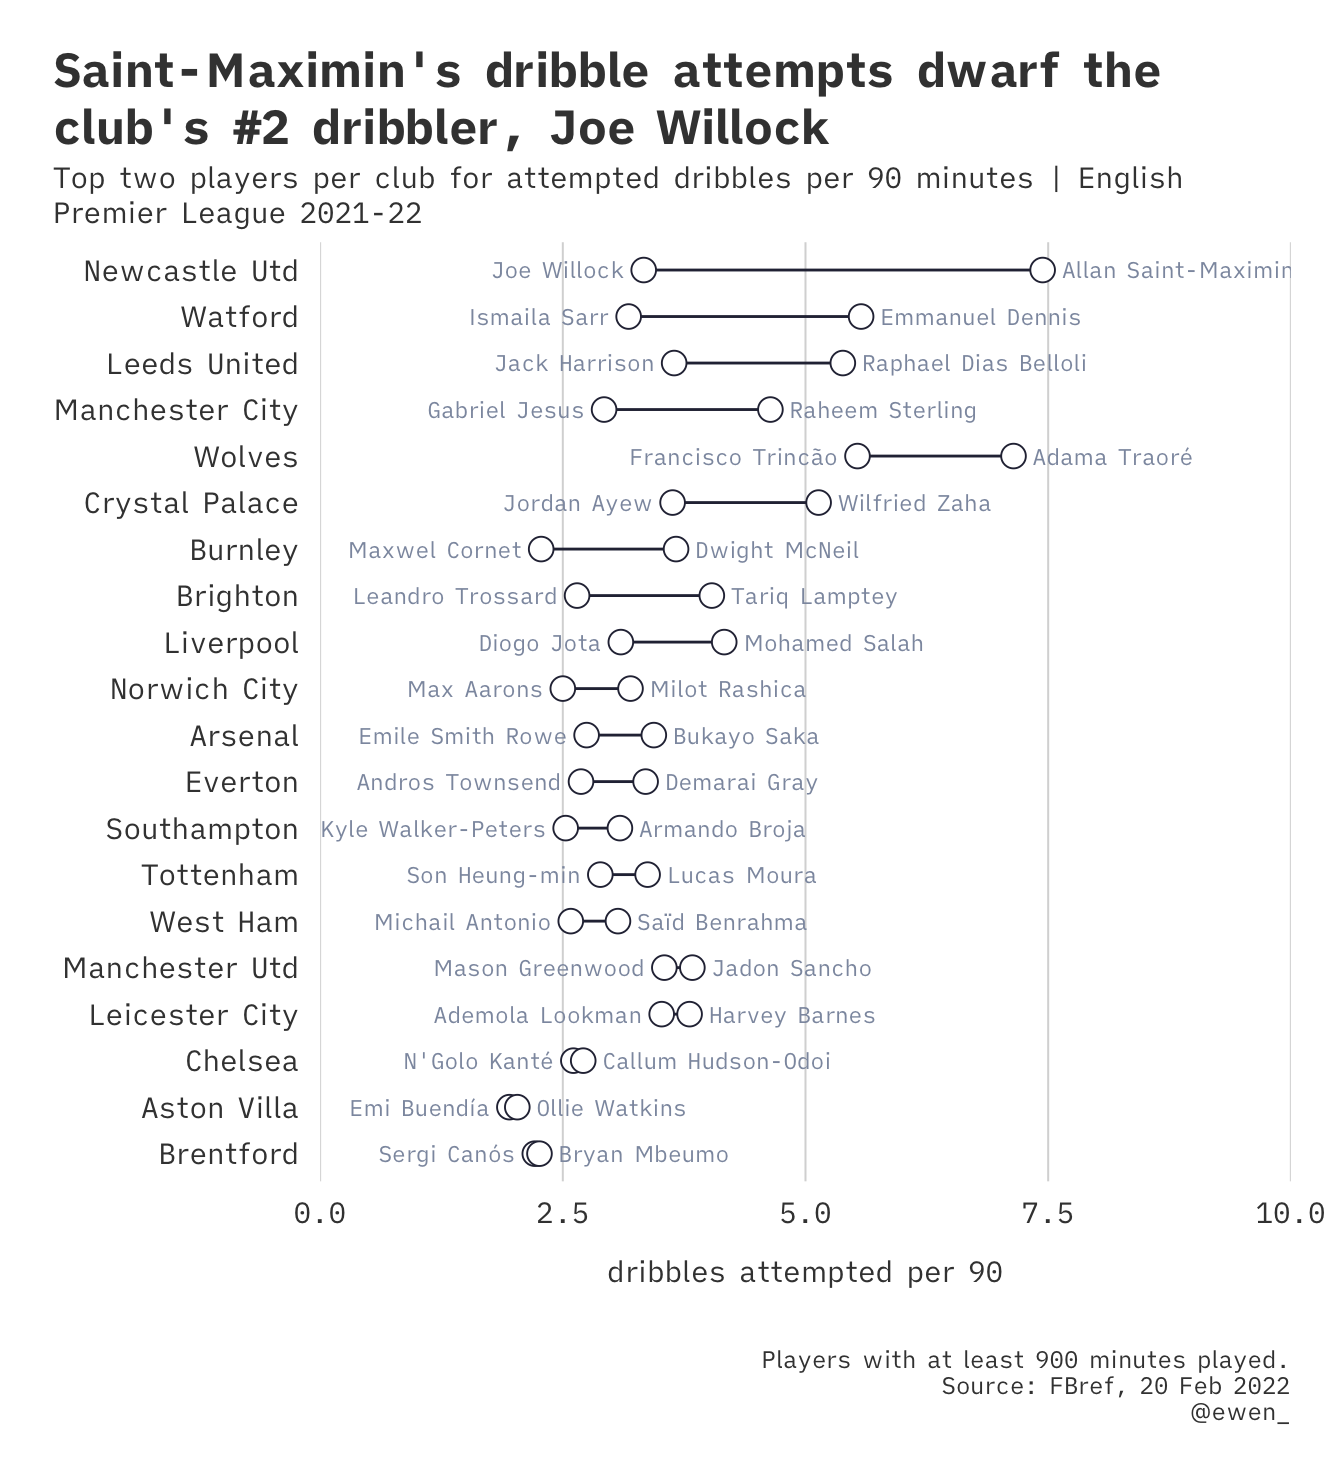 A chart demonstrating that Saint Maximin's dribbling is a lot more than Joe Willock, the next best at the club